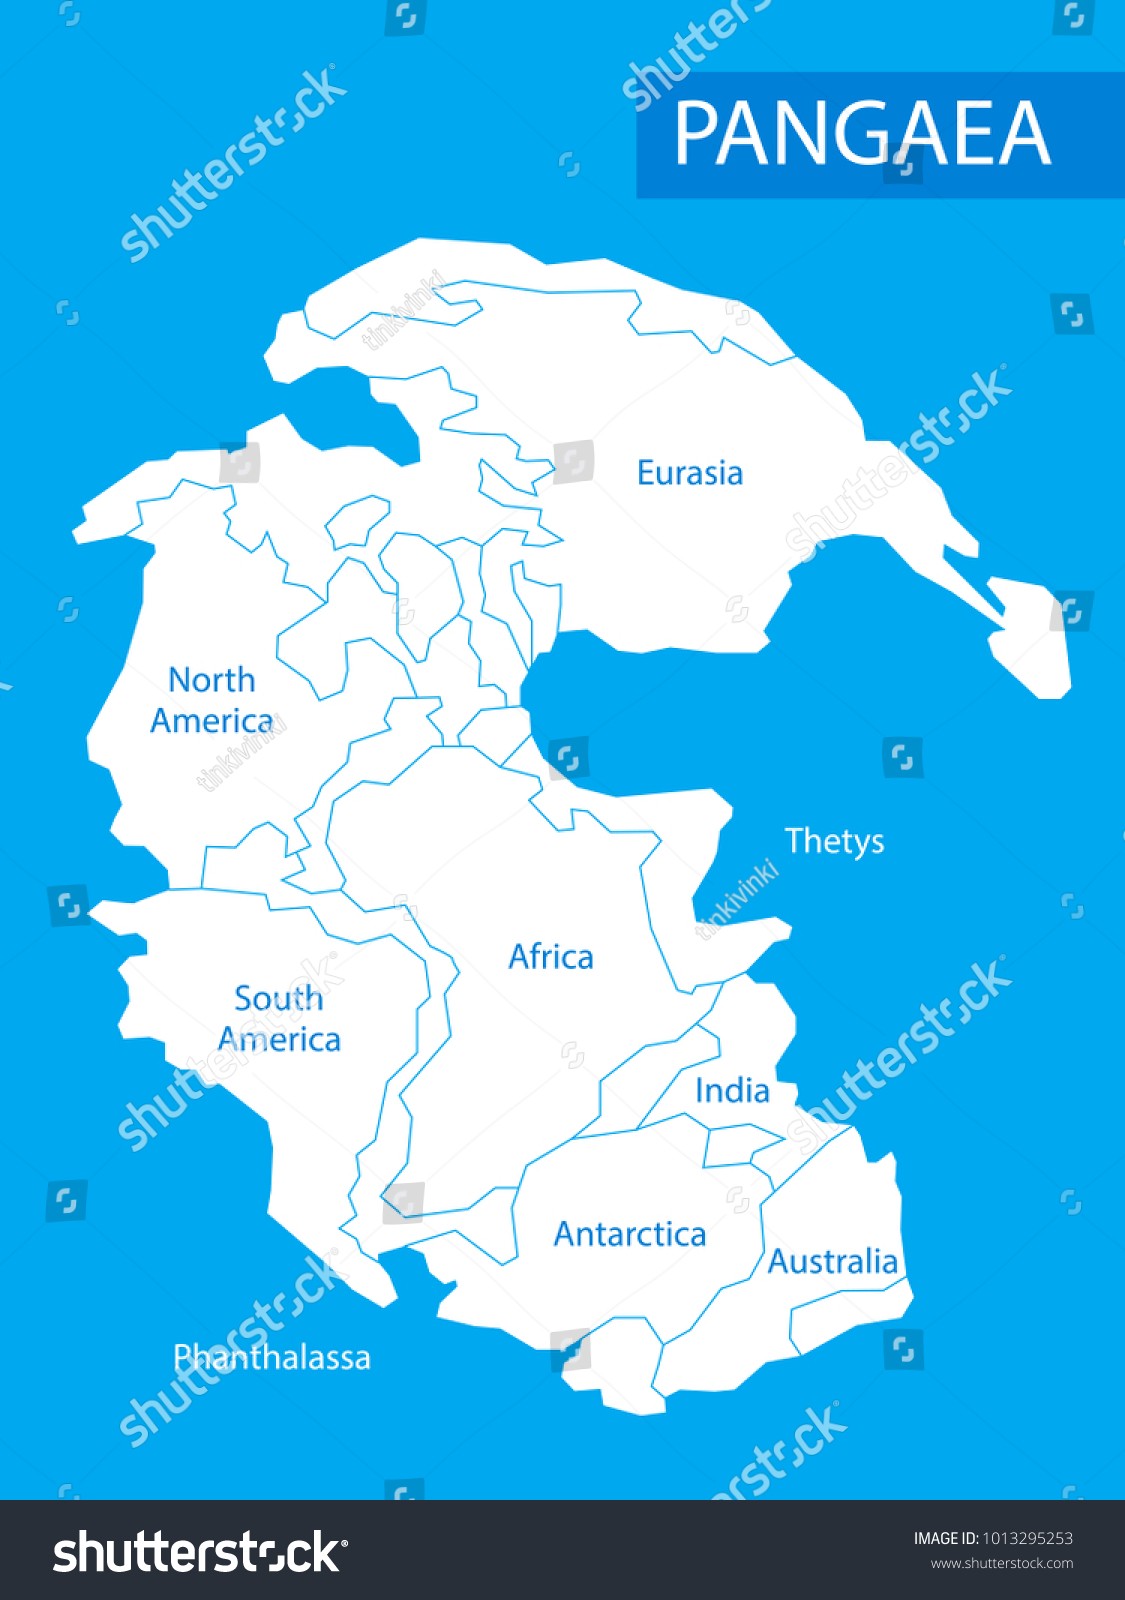 Pangaea Pangea Illustration Supercontinent That Existed Stock